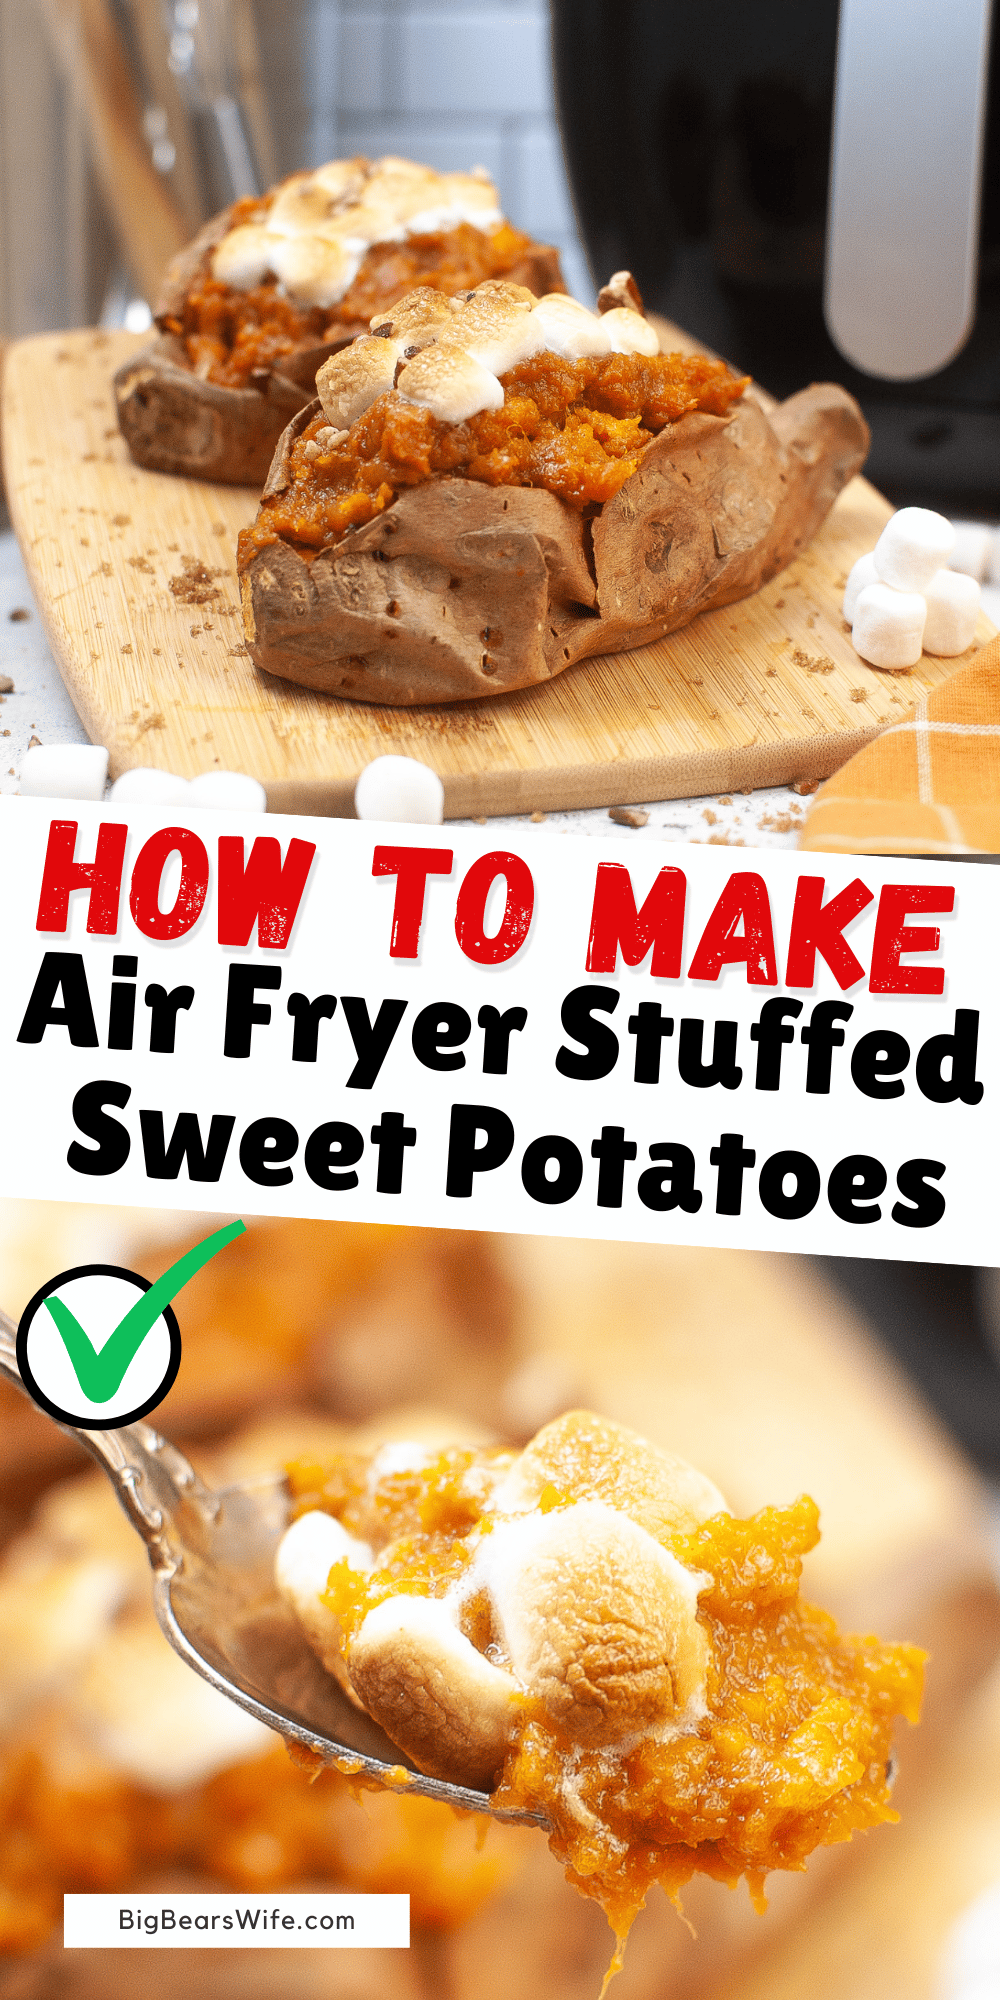 Air Fryer Stuffed Sweet Potatoes- Let's make some perfectly baked sweet potatoes in the Air Fryer! We're packing these with some wonderful flavors and topping them with chopped pecans and toasted mini marshmallows! via @bigbearswife